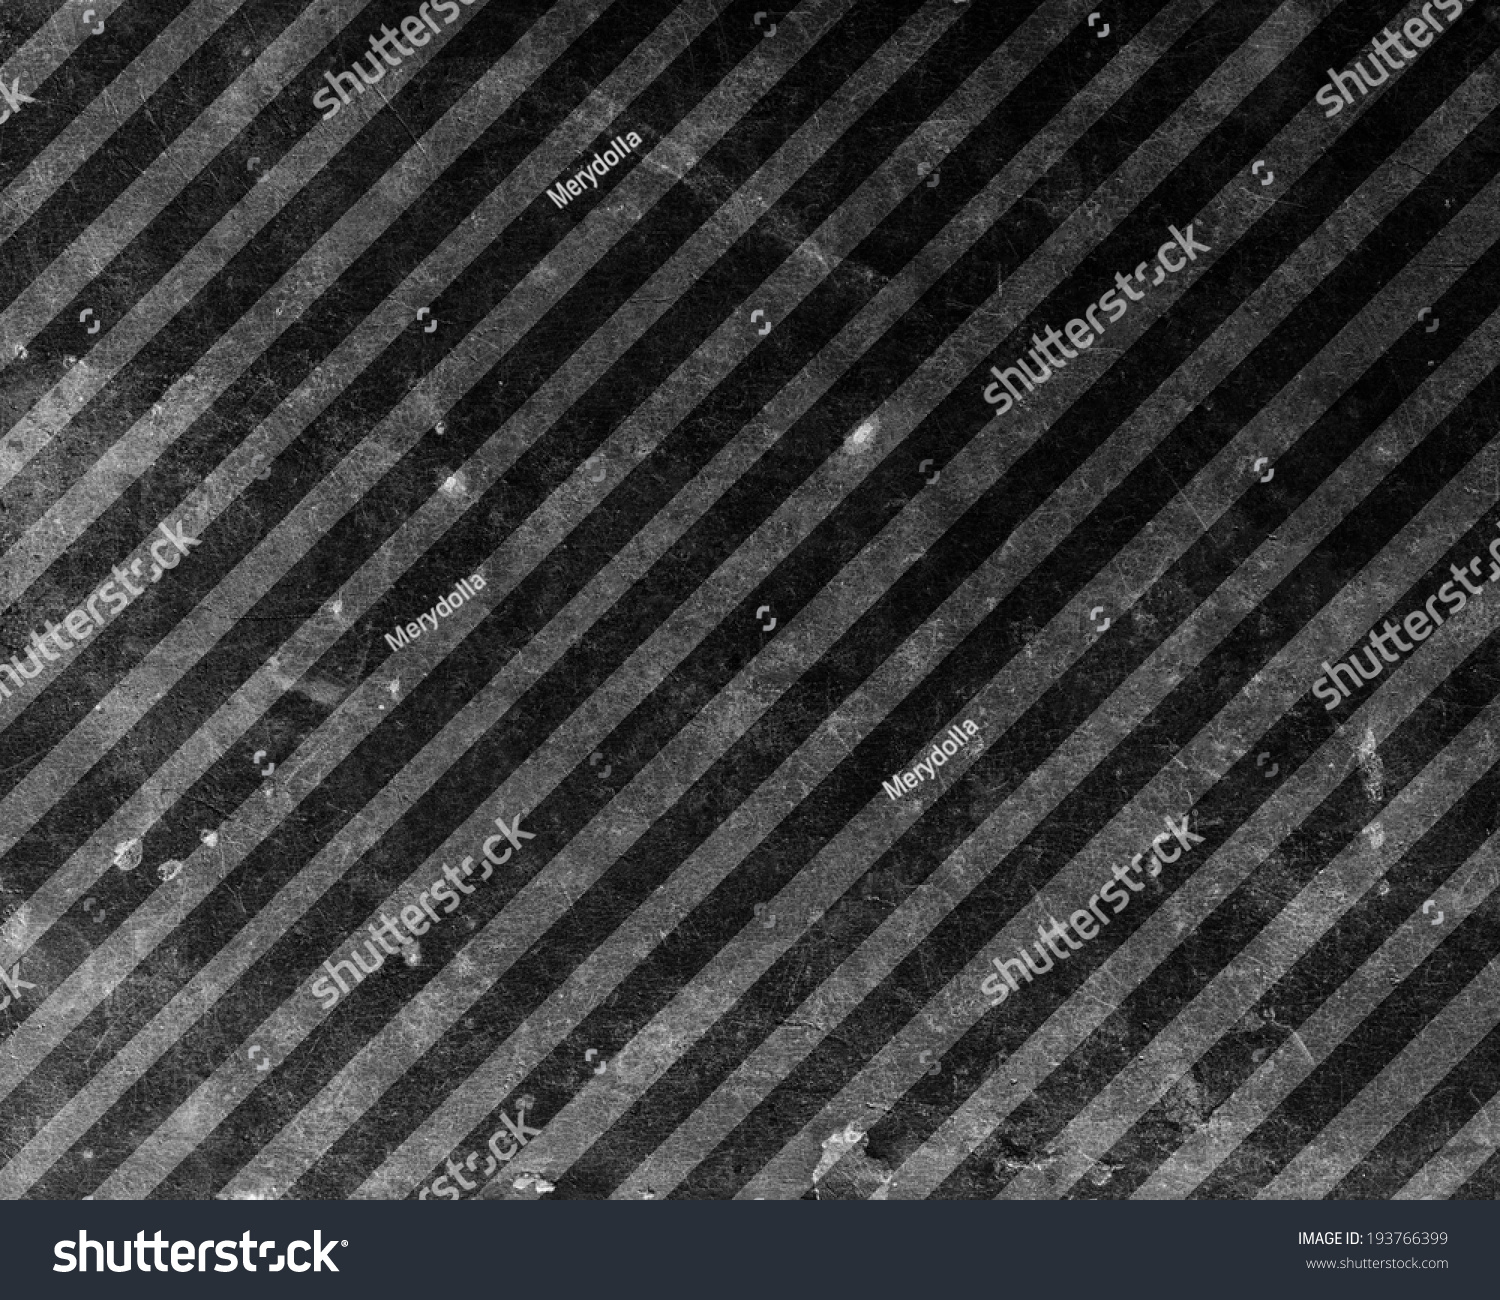 Grunge background with diagonal lines #193766399